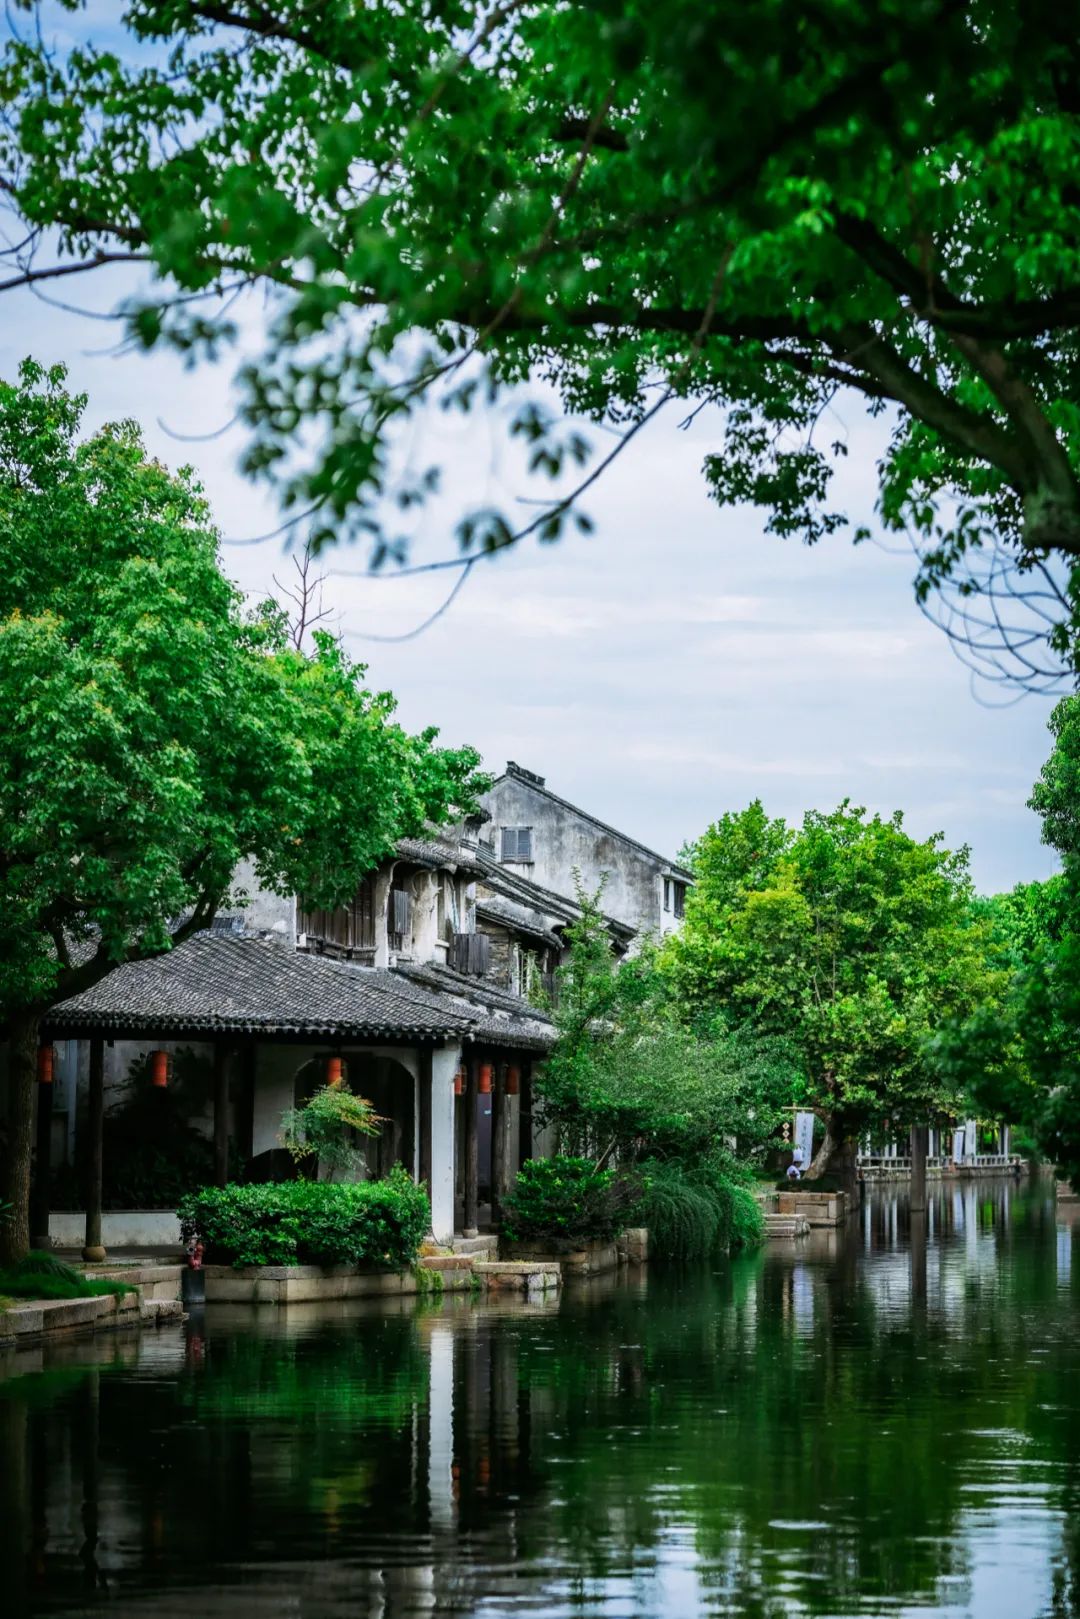 The ancient town of Lili is situated in Wujiang District of Suzhou and is a well-preserved south China-style town. /CMG